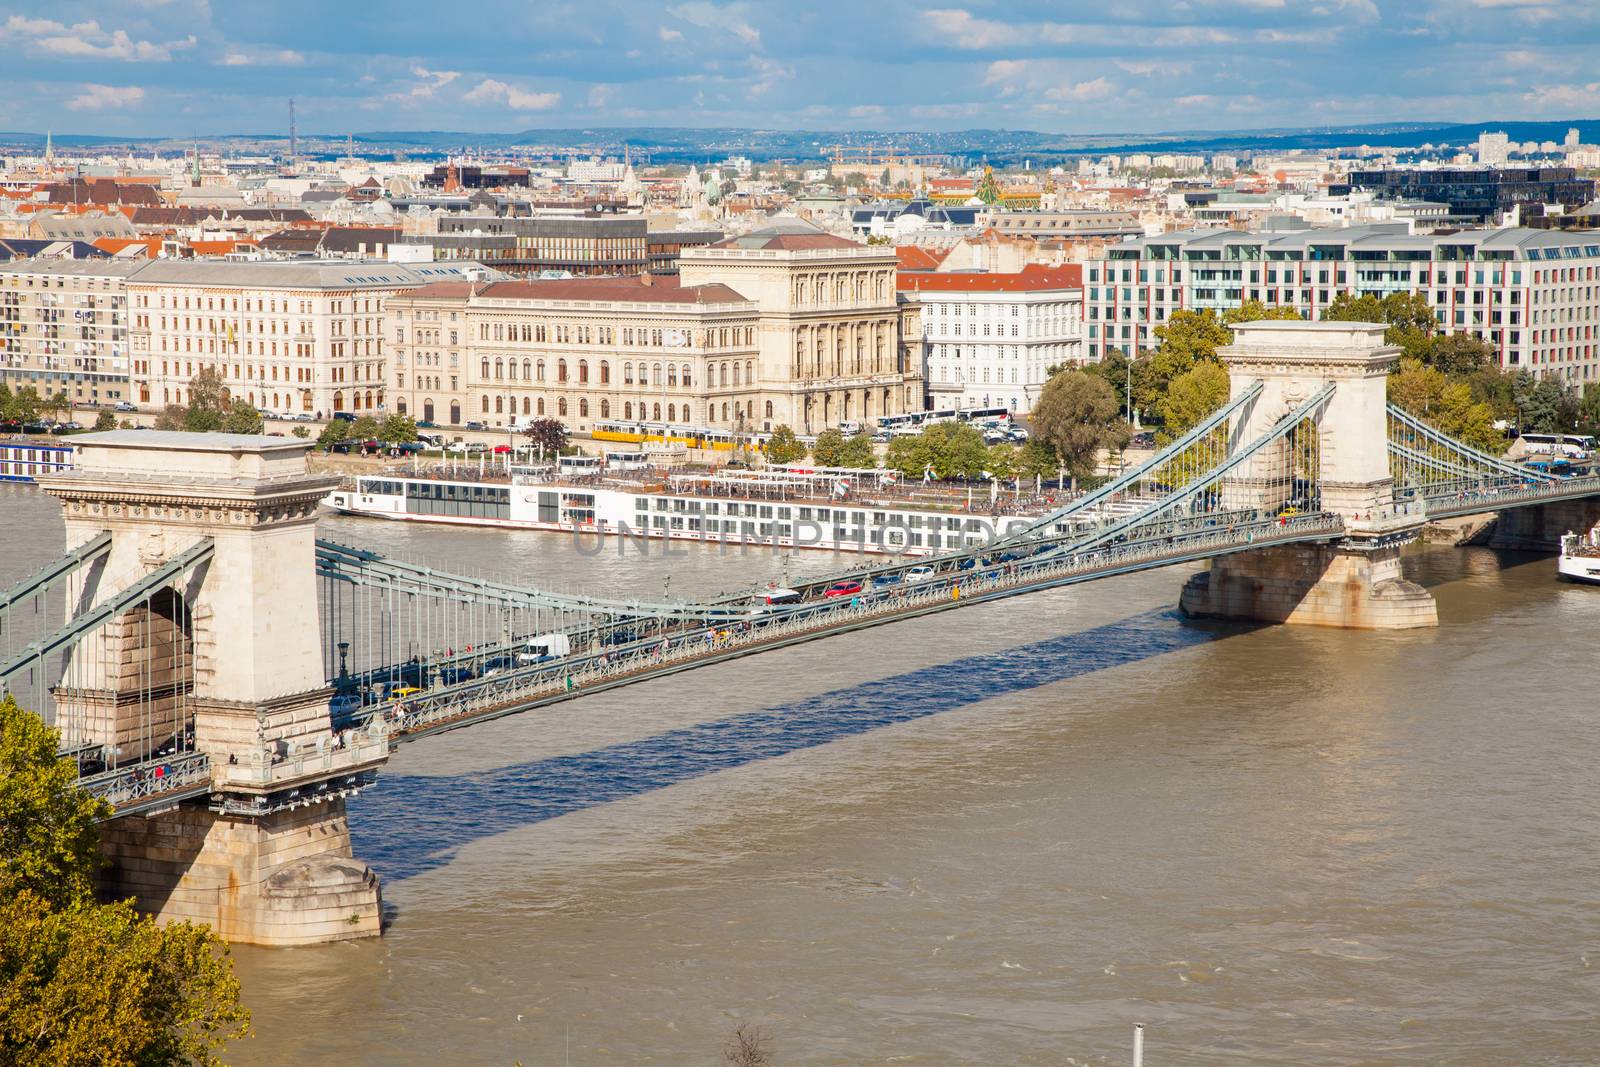 Széchenyi Chain Bridge is a suspension bridge that spans the river Danube between Buda and Pest